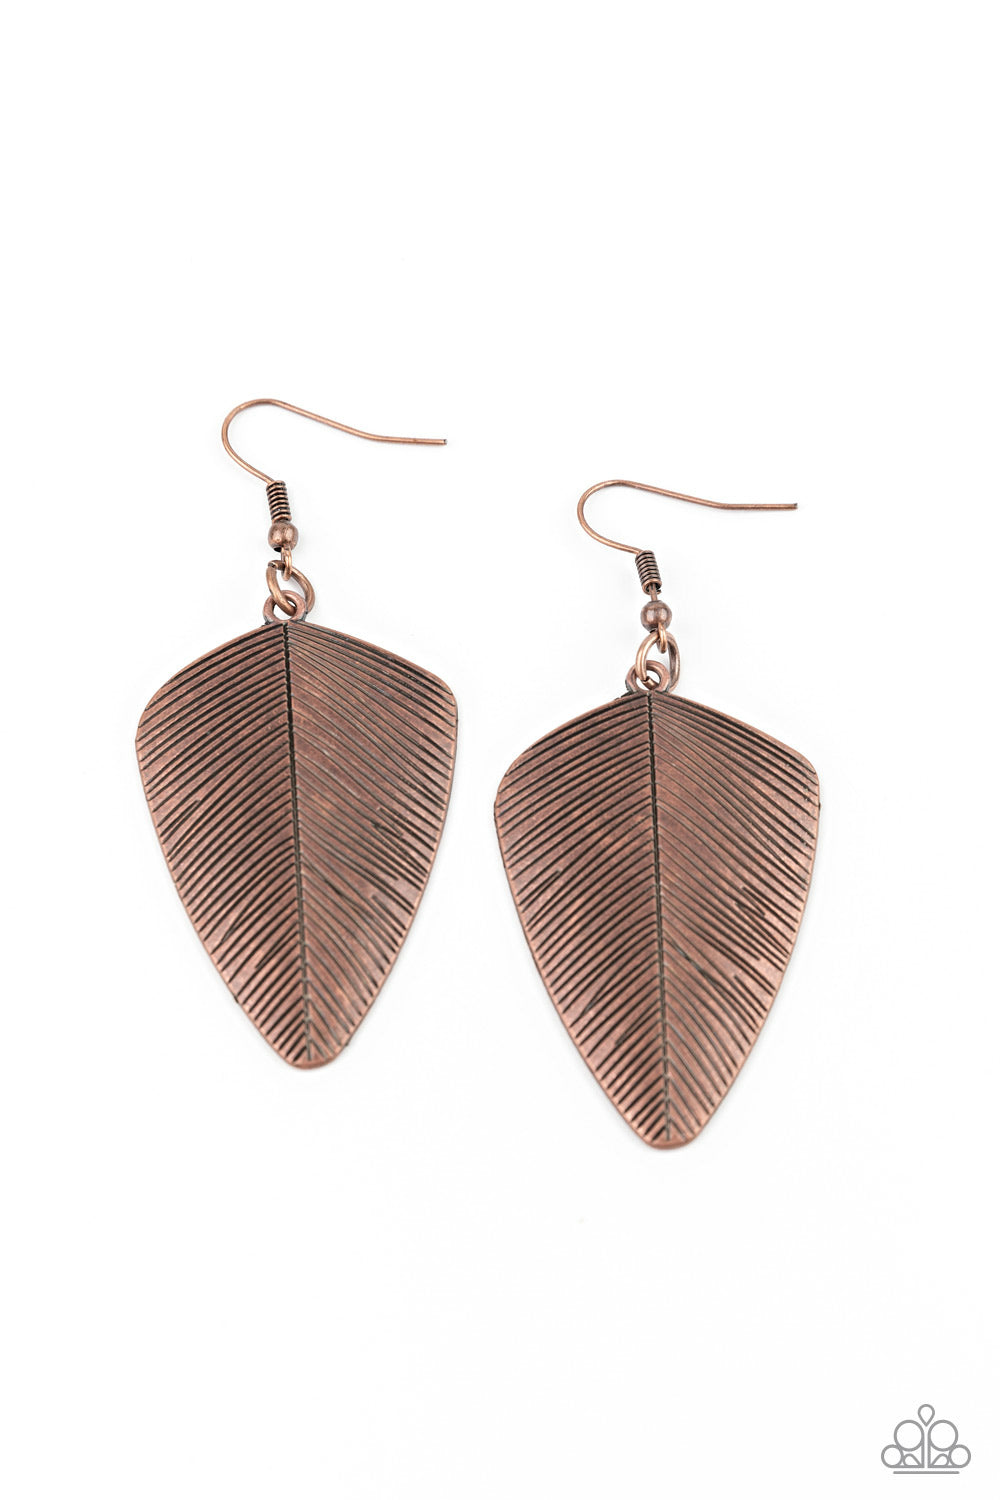 One Of The Flock - Copper Earrings - Paparazzi Accessories - Paparazzi Accessories 